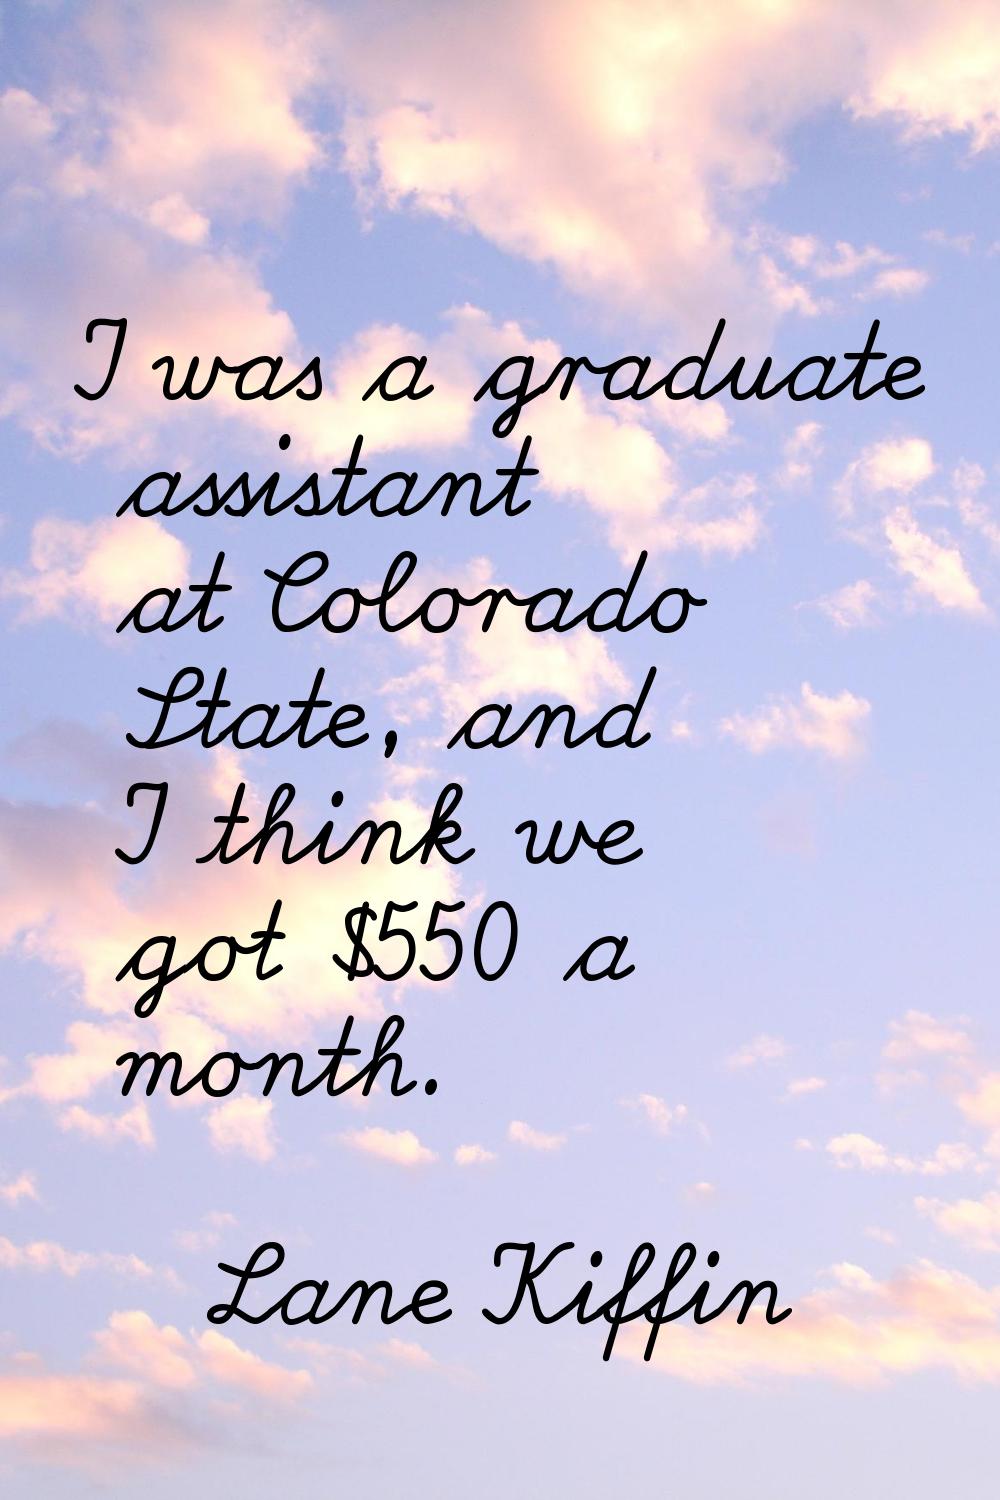 I was a graduate assistant at Colorado State, and I think we got $550 a month.